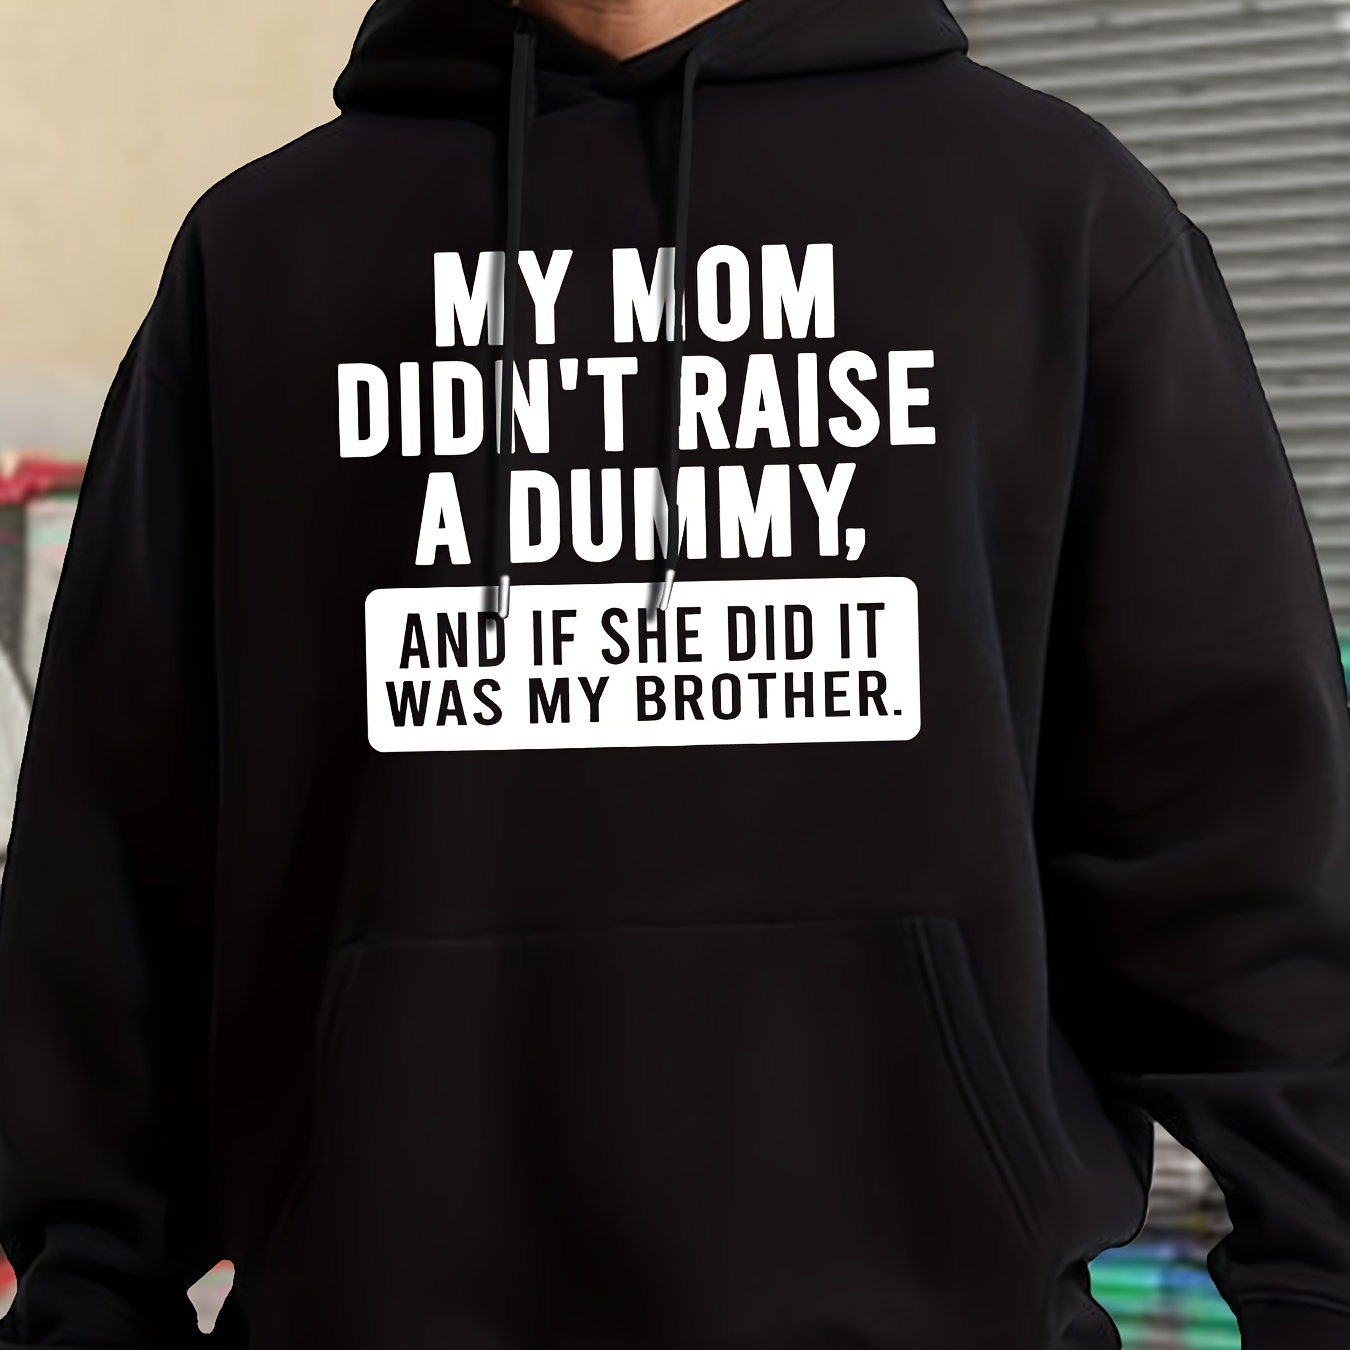 

My Mom Didn't Raise A Dummy, And If She Did It Was My Brother Print Kangaroo Pocket Hoodie, Casual Long Sleeve Hoodies Pullover Sweatshirt, Men's Clothing, For Fall Winter